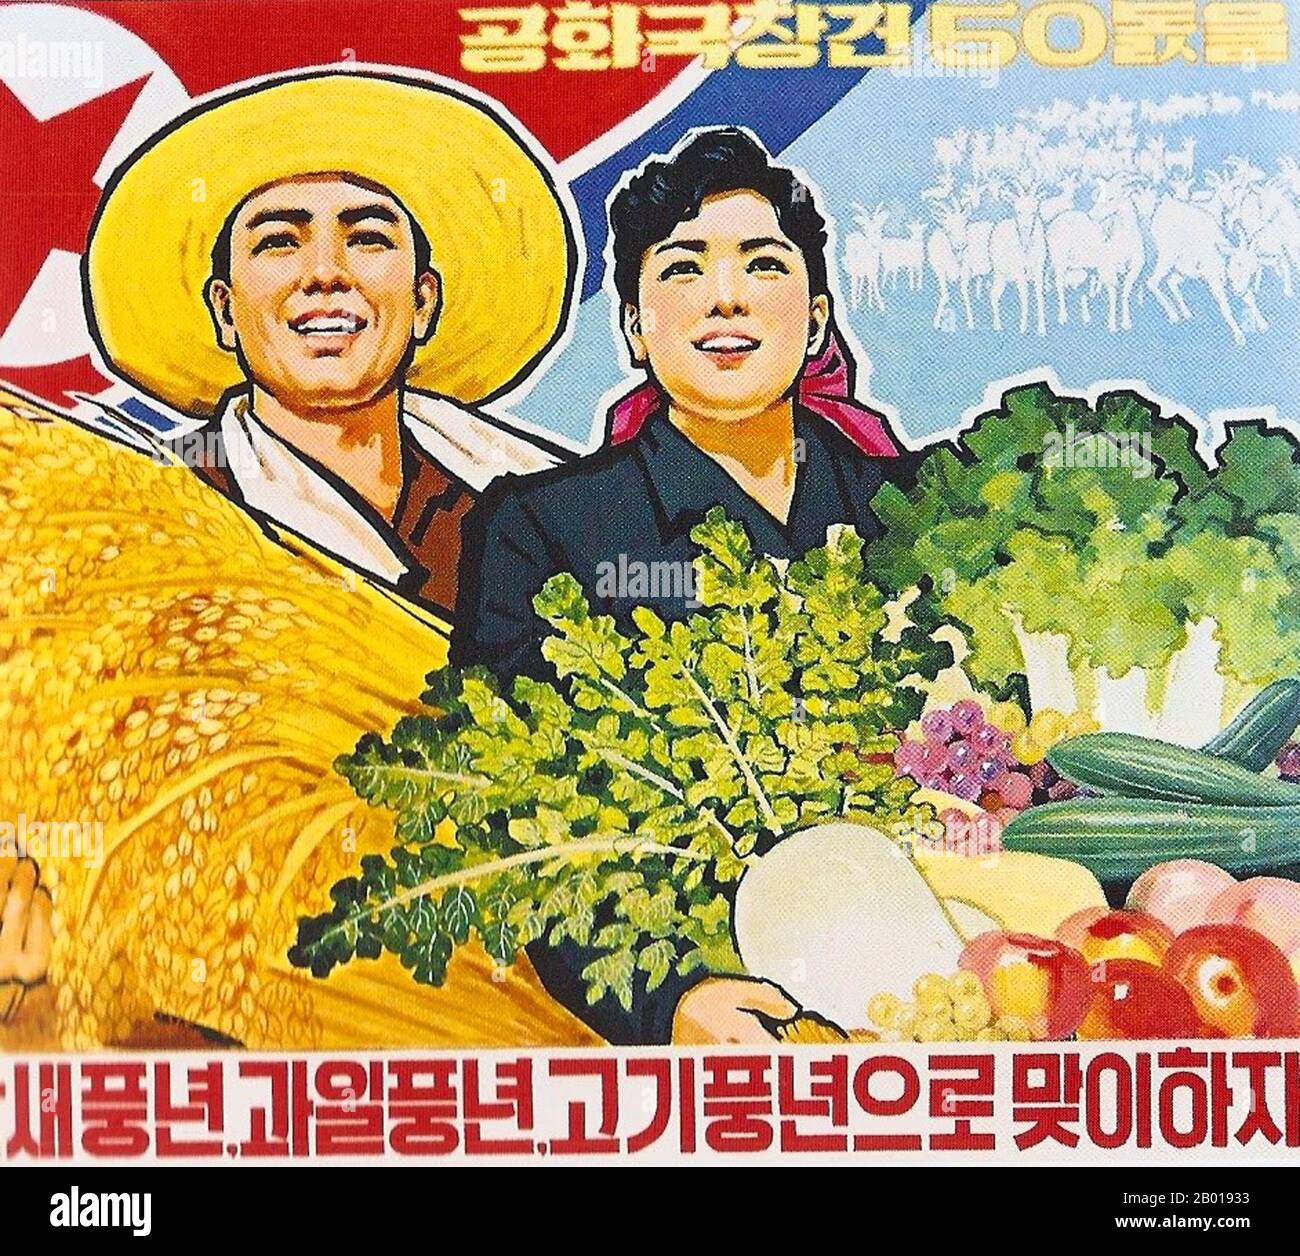 Korea: North Korean (DPRK) propaganda poster glorifying agricultural production, c. 1950s.  Socialist Realism is a style of realistic art which developed under Socialism in the Soviet Union and became a dominant style in other communist countries. Socialist Realism is a teleologically-oriented style having as its purpose the furtherance of the goals of socialism and communism. Although related, it should not be confused with Social Realism, a type of art that realistically depicts subjects of social concern. Socialist Realism generally glorifies the ideology of the communist state. Stock Photo